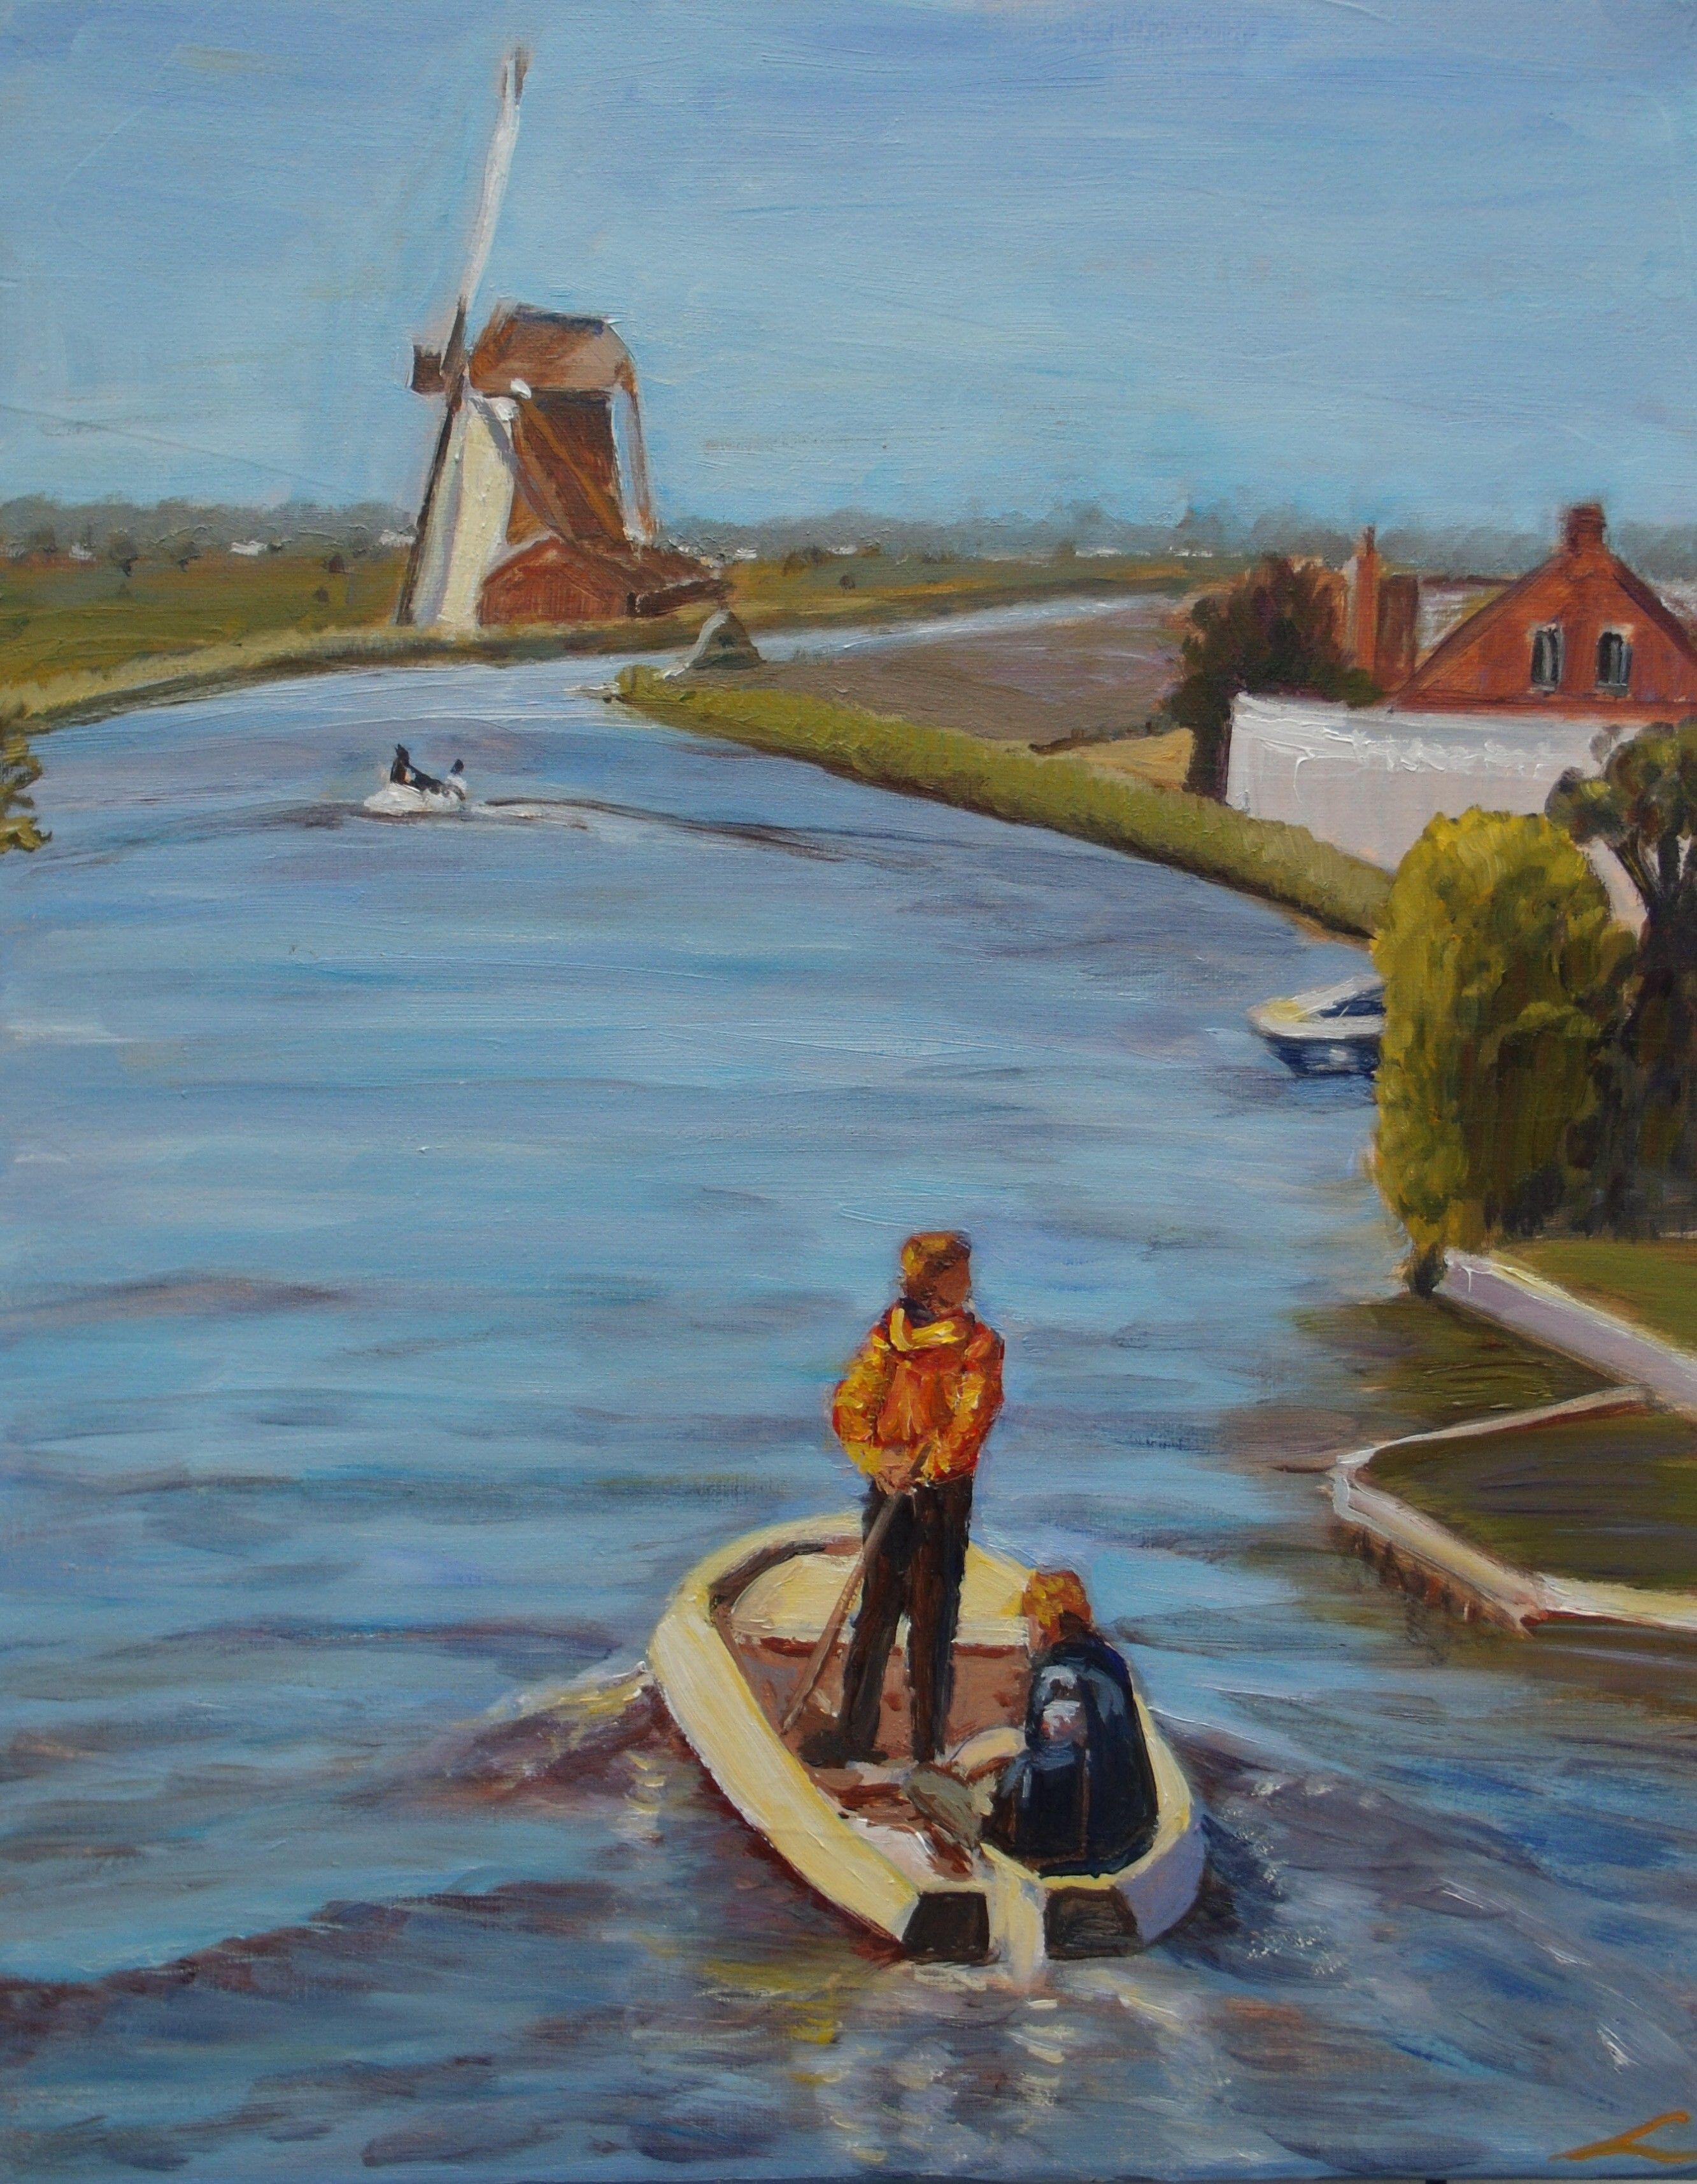 Landscape with a windmill at the channel and two boys in the boat, painted by oil on canvas. :: Painting :: Impressionist :: This piece comes with an official certificate of authenticity signed by the artist :: Ready to Hang: Yes :: Signed: Yes ::